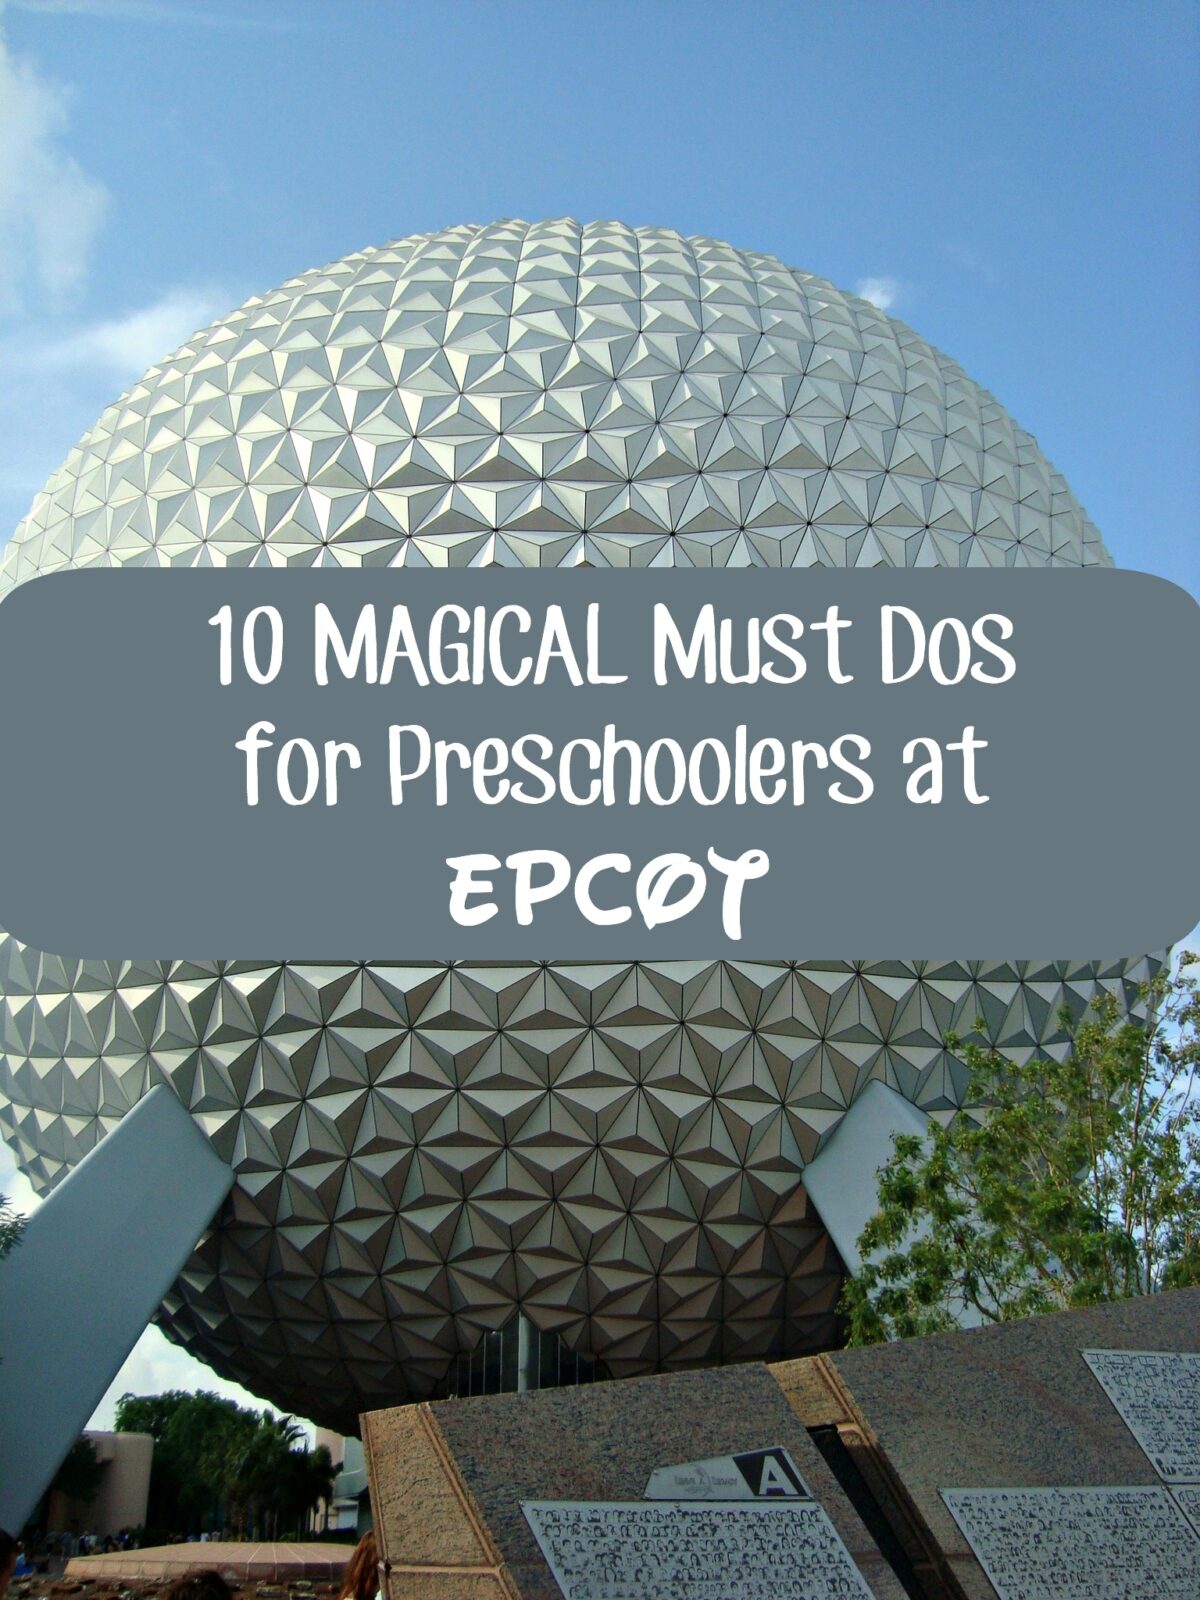 Magical Must Dos for Preschoolers at EPCOT